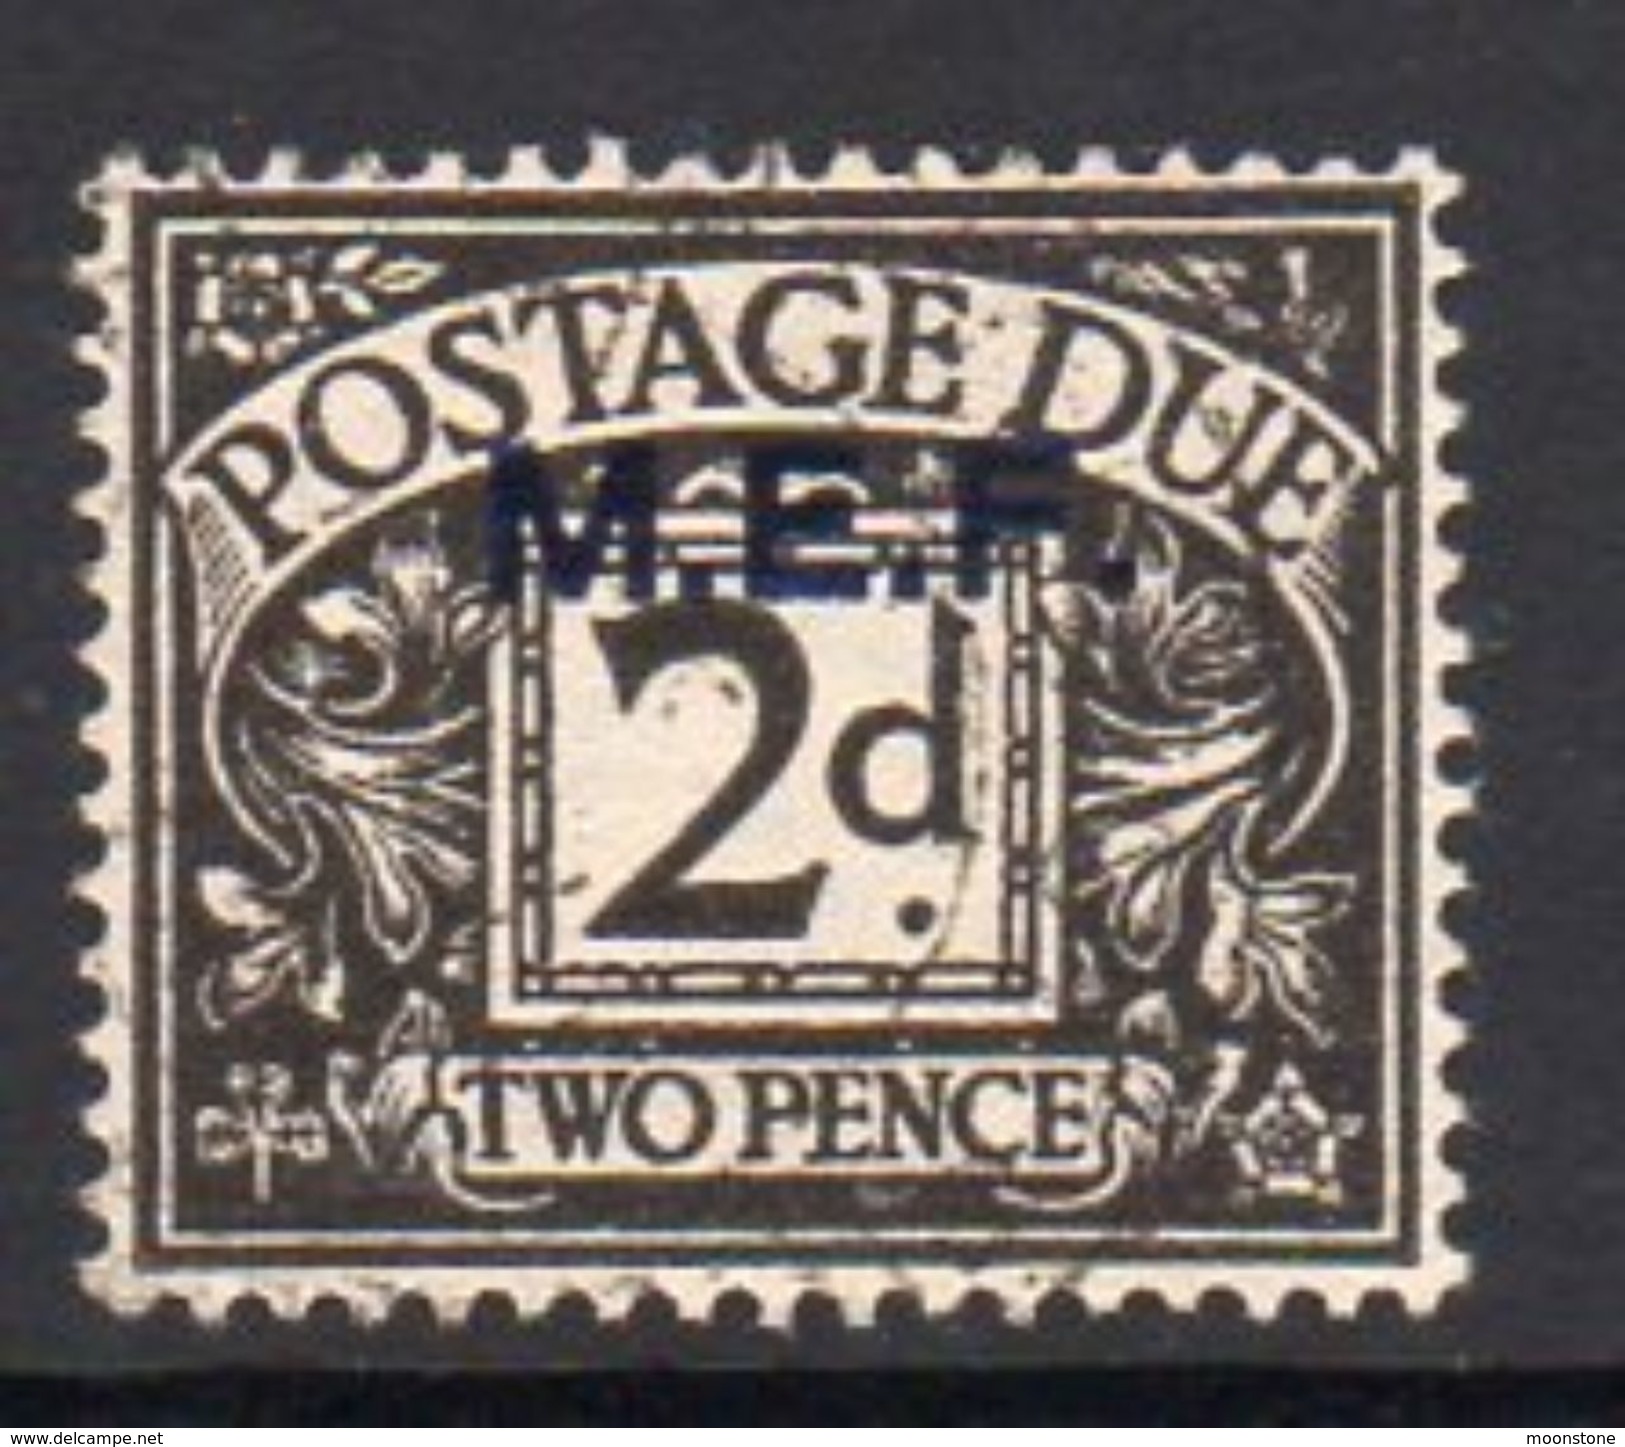 BOIC, Middle East Forces 1942 2d Postage Due Overprint On GB, Used, SG MD3 (A) - Occup. Britannica MEF